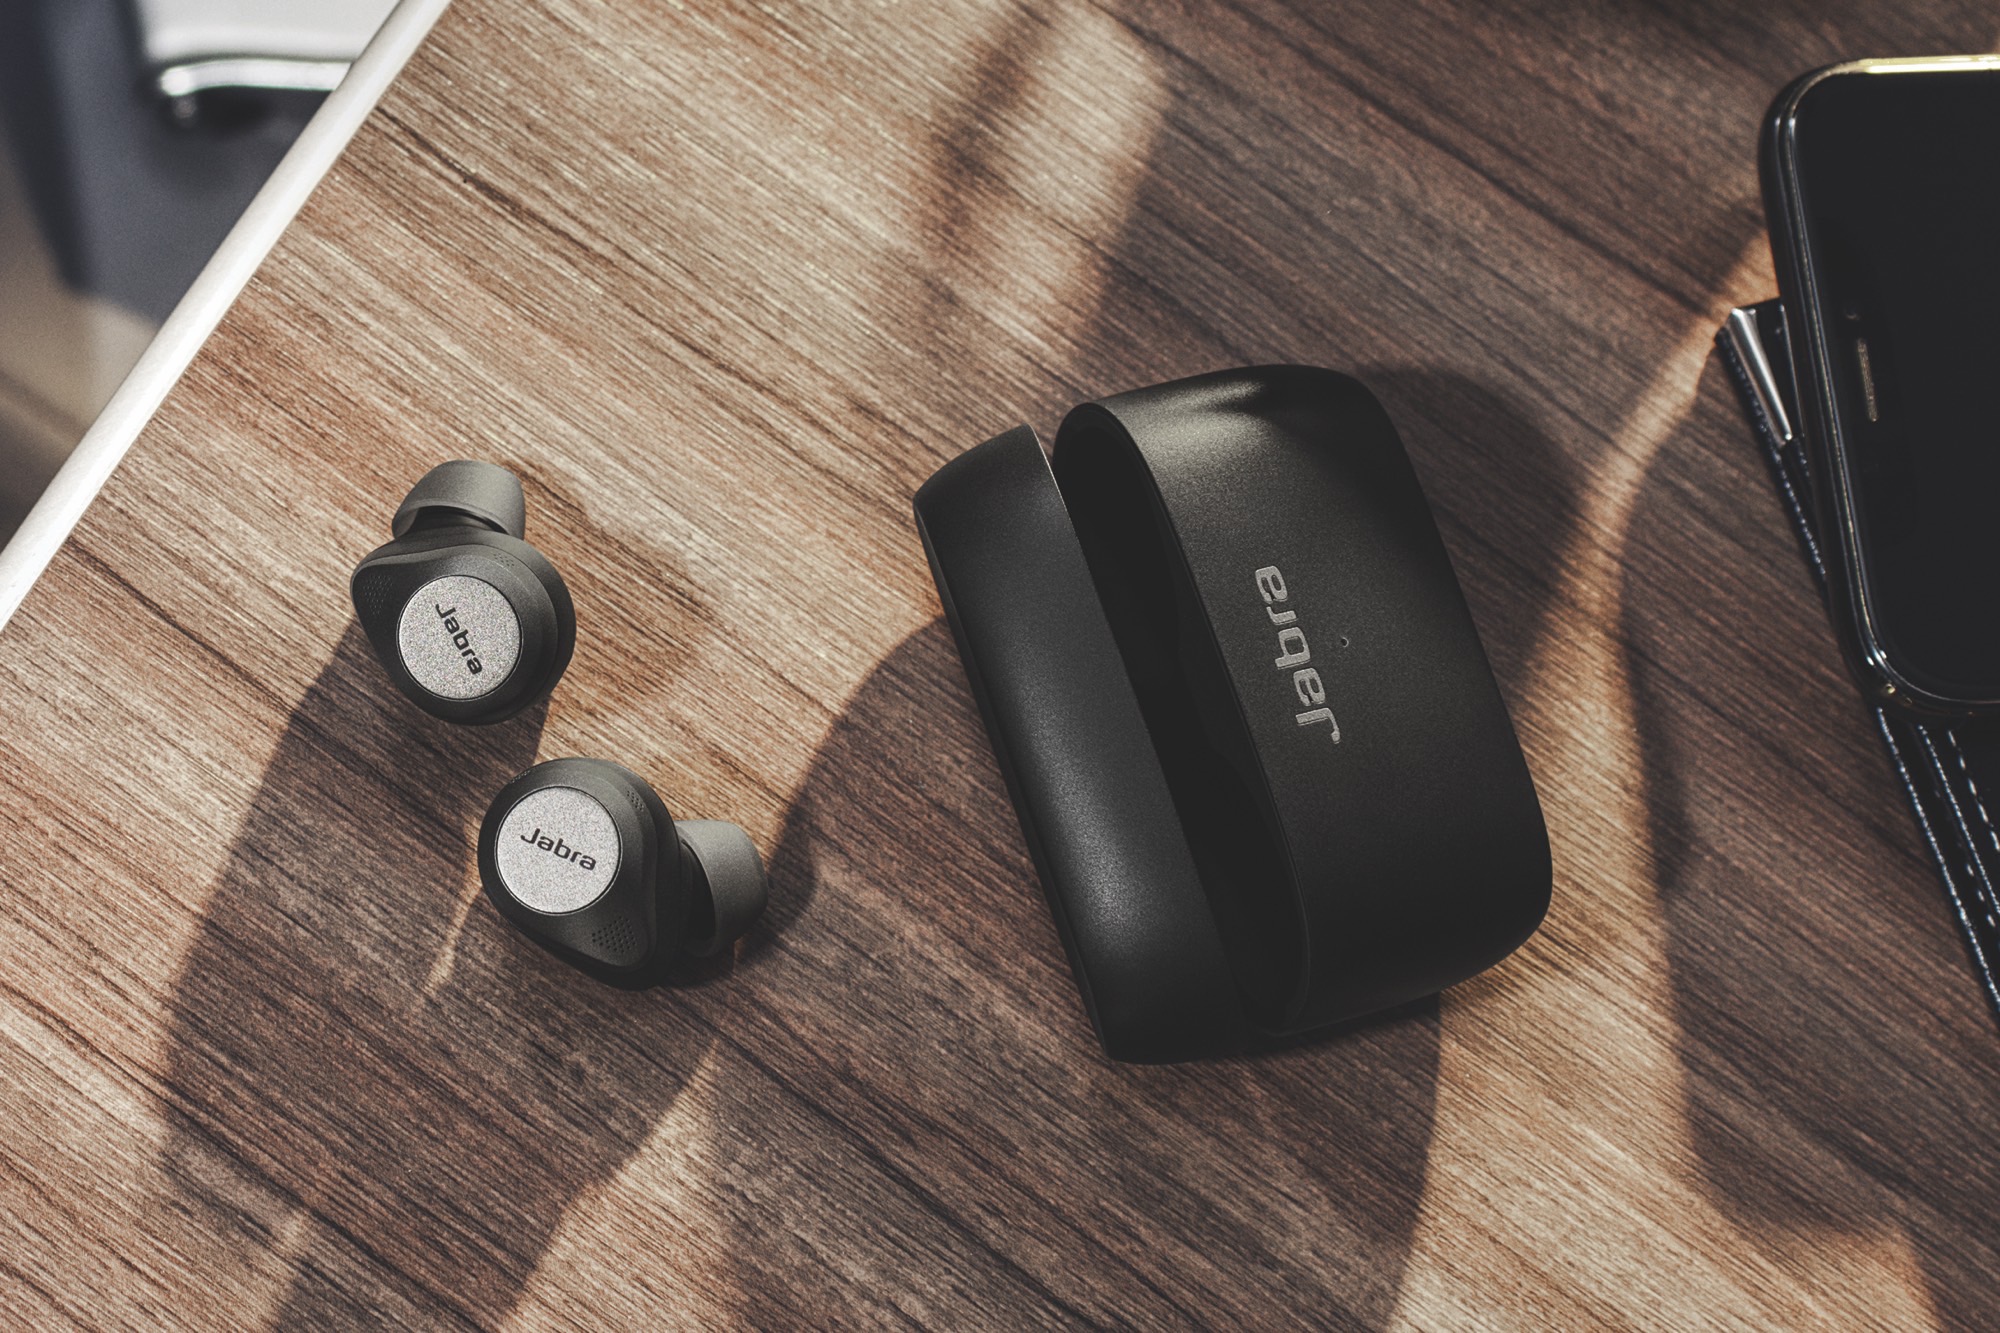 The Jabra Elite 85t wireless earbuds and their charging case.